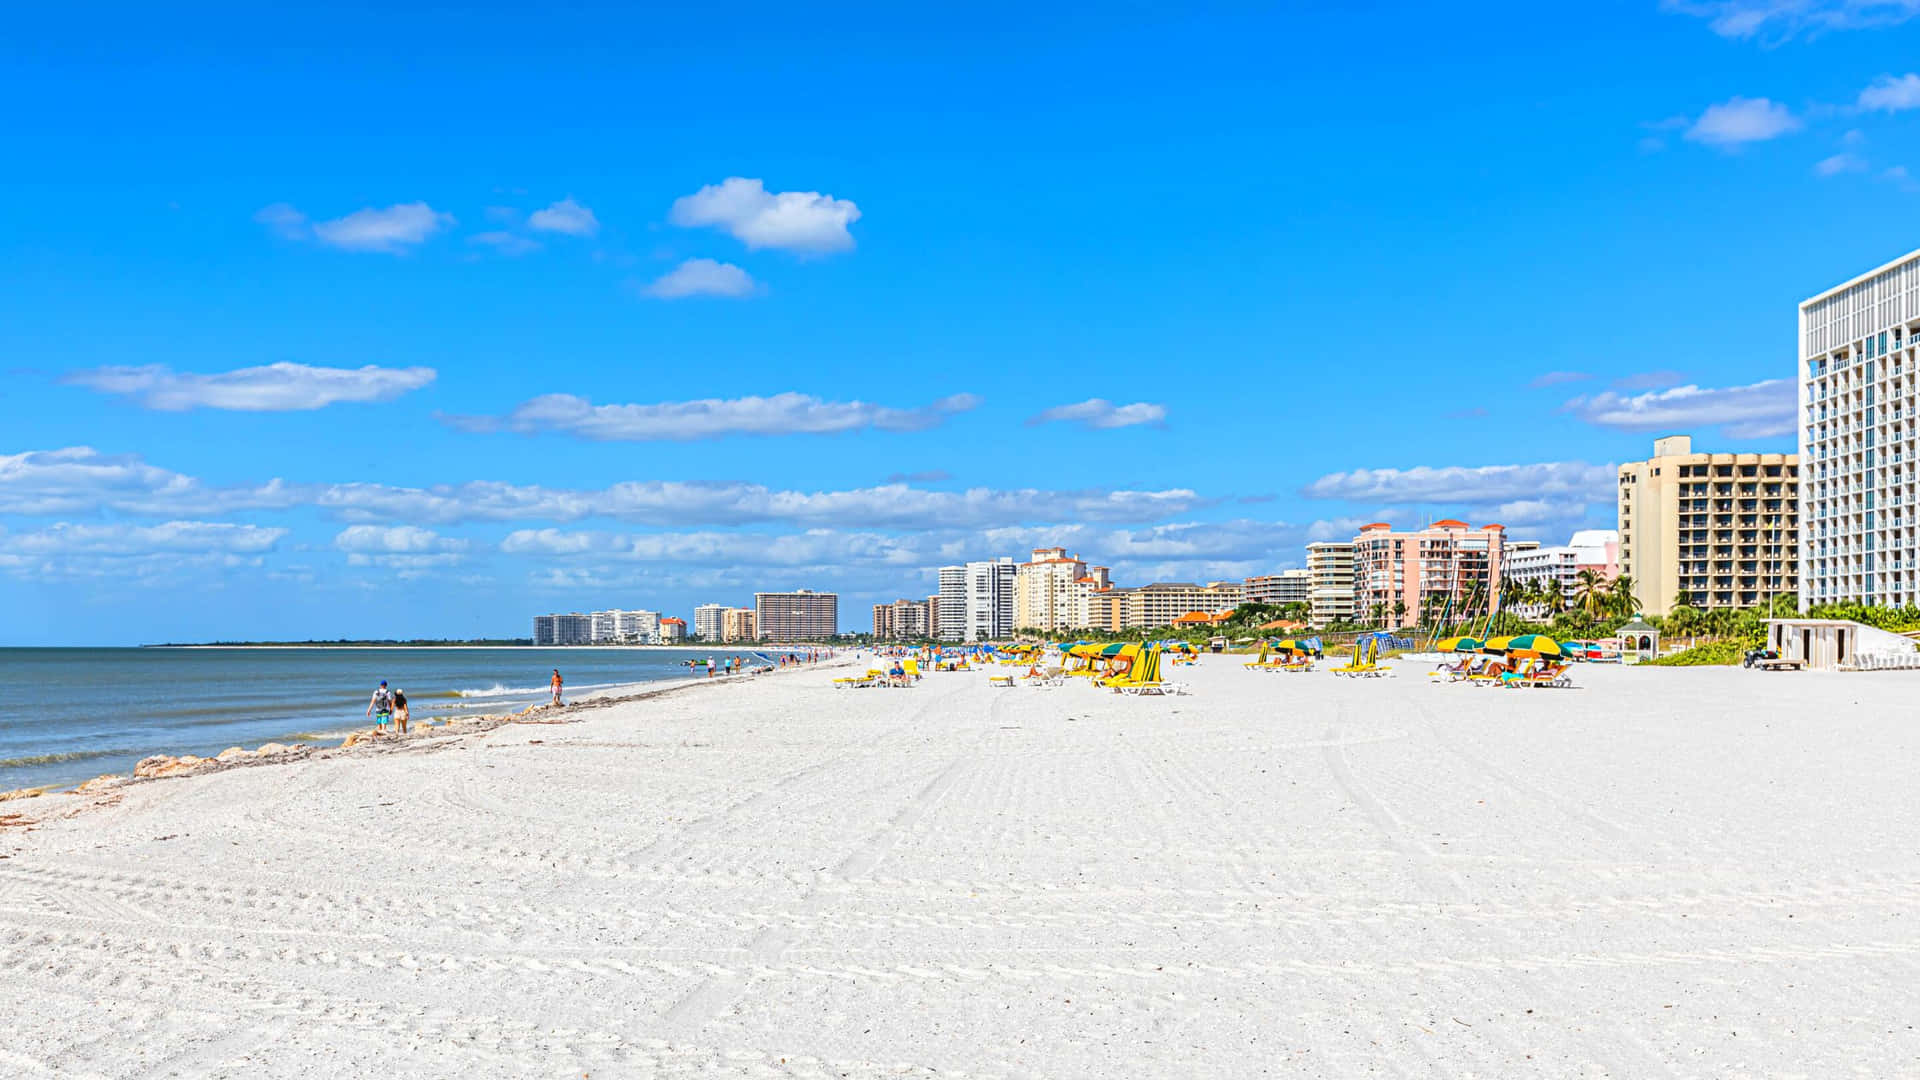 Come experience the sandy beaches and sunshine of Marco Island, FL. Sunrise never looked so beautiful!